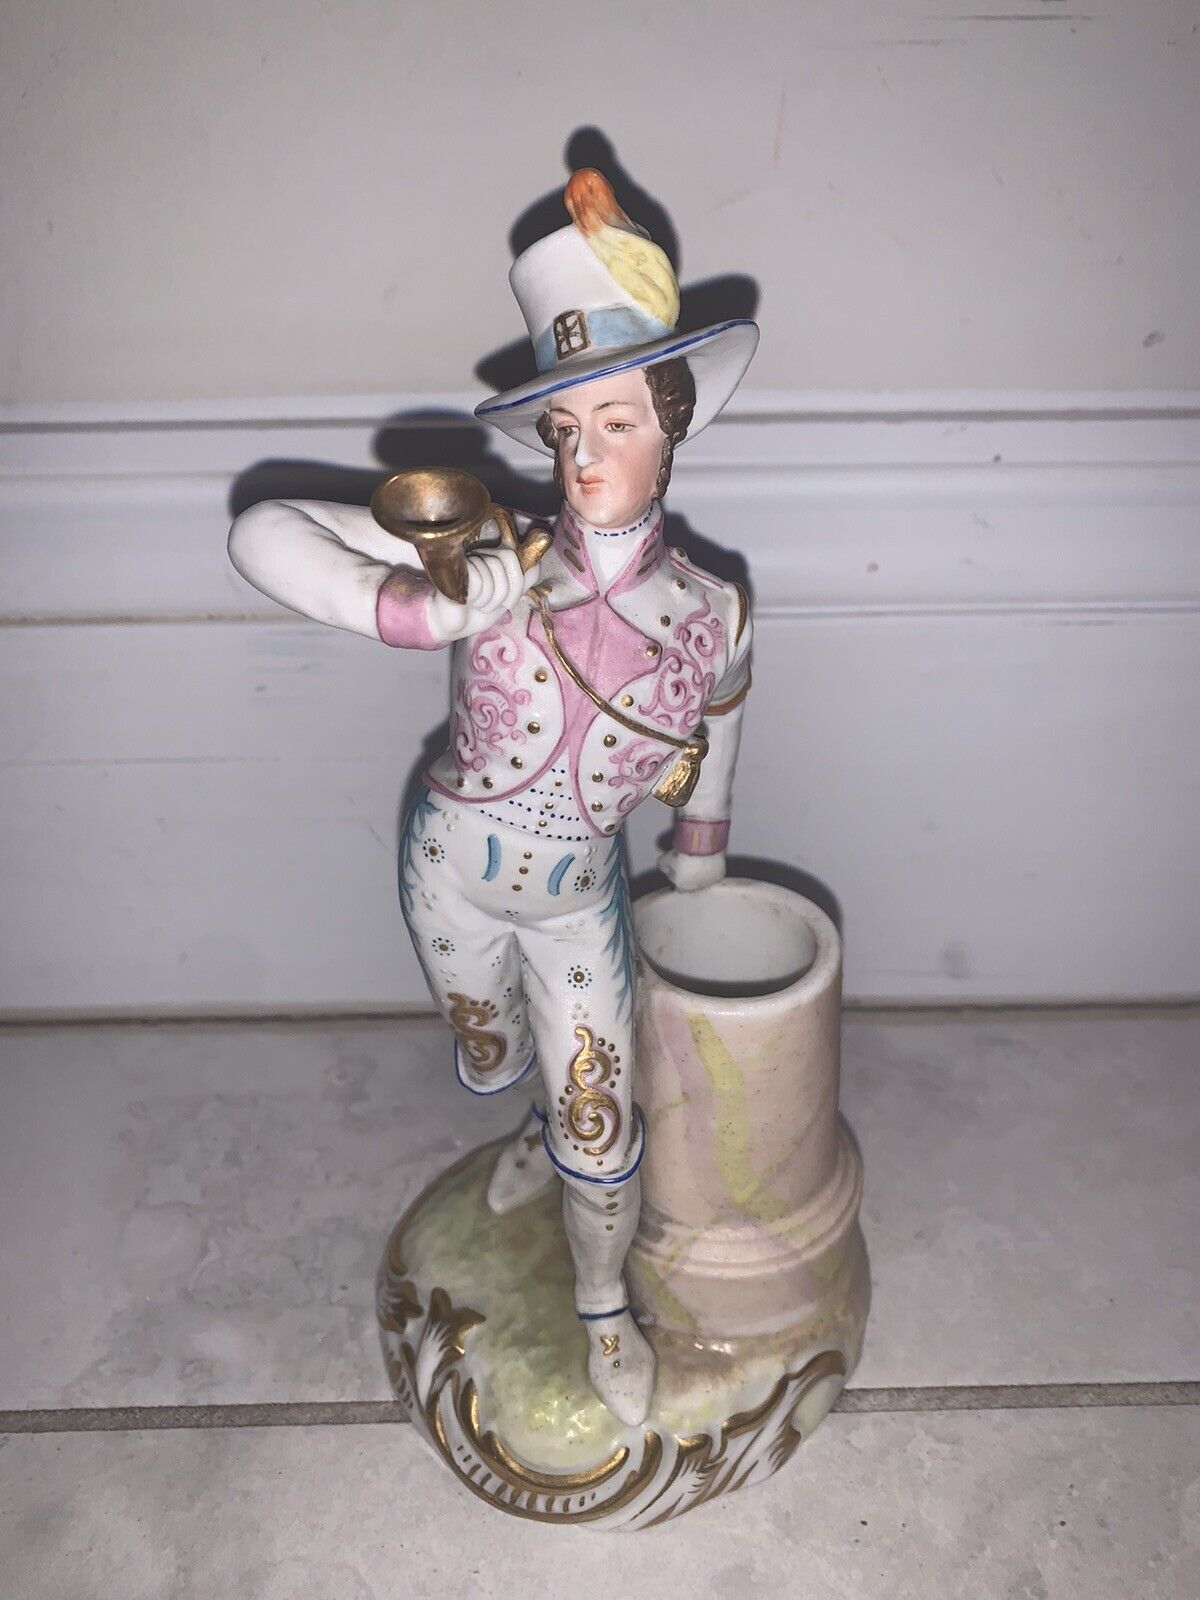 Antique French Bisque Porcelain Figurine 7.5” Tall - Marked